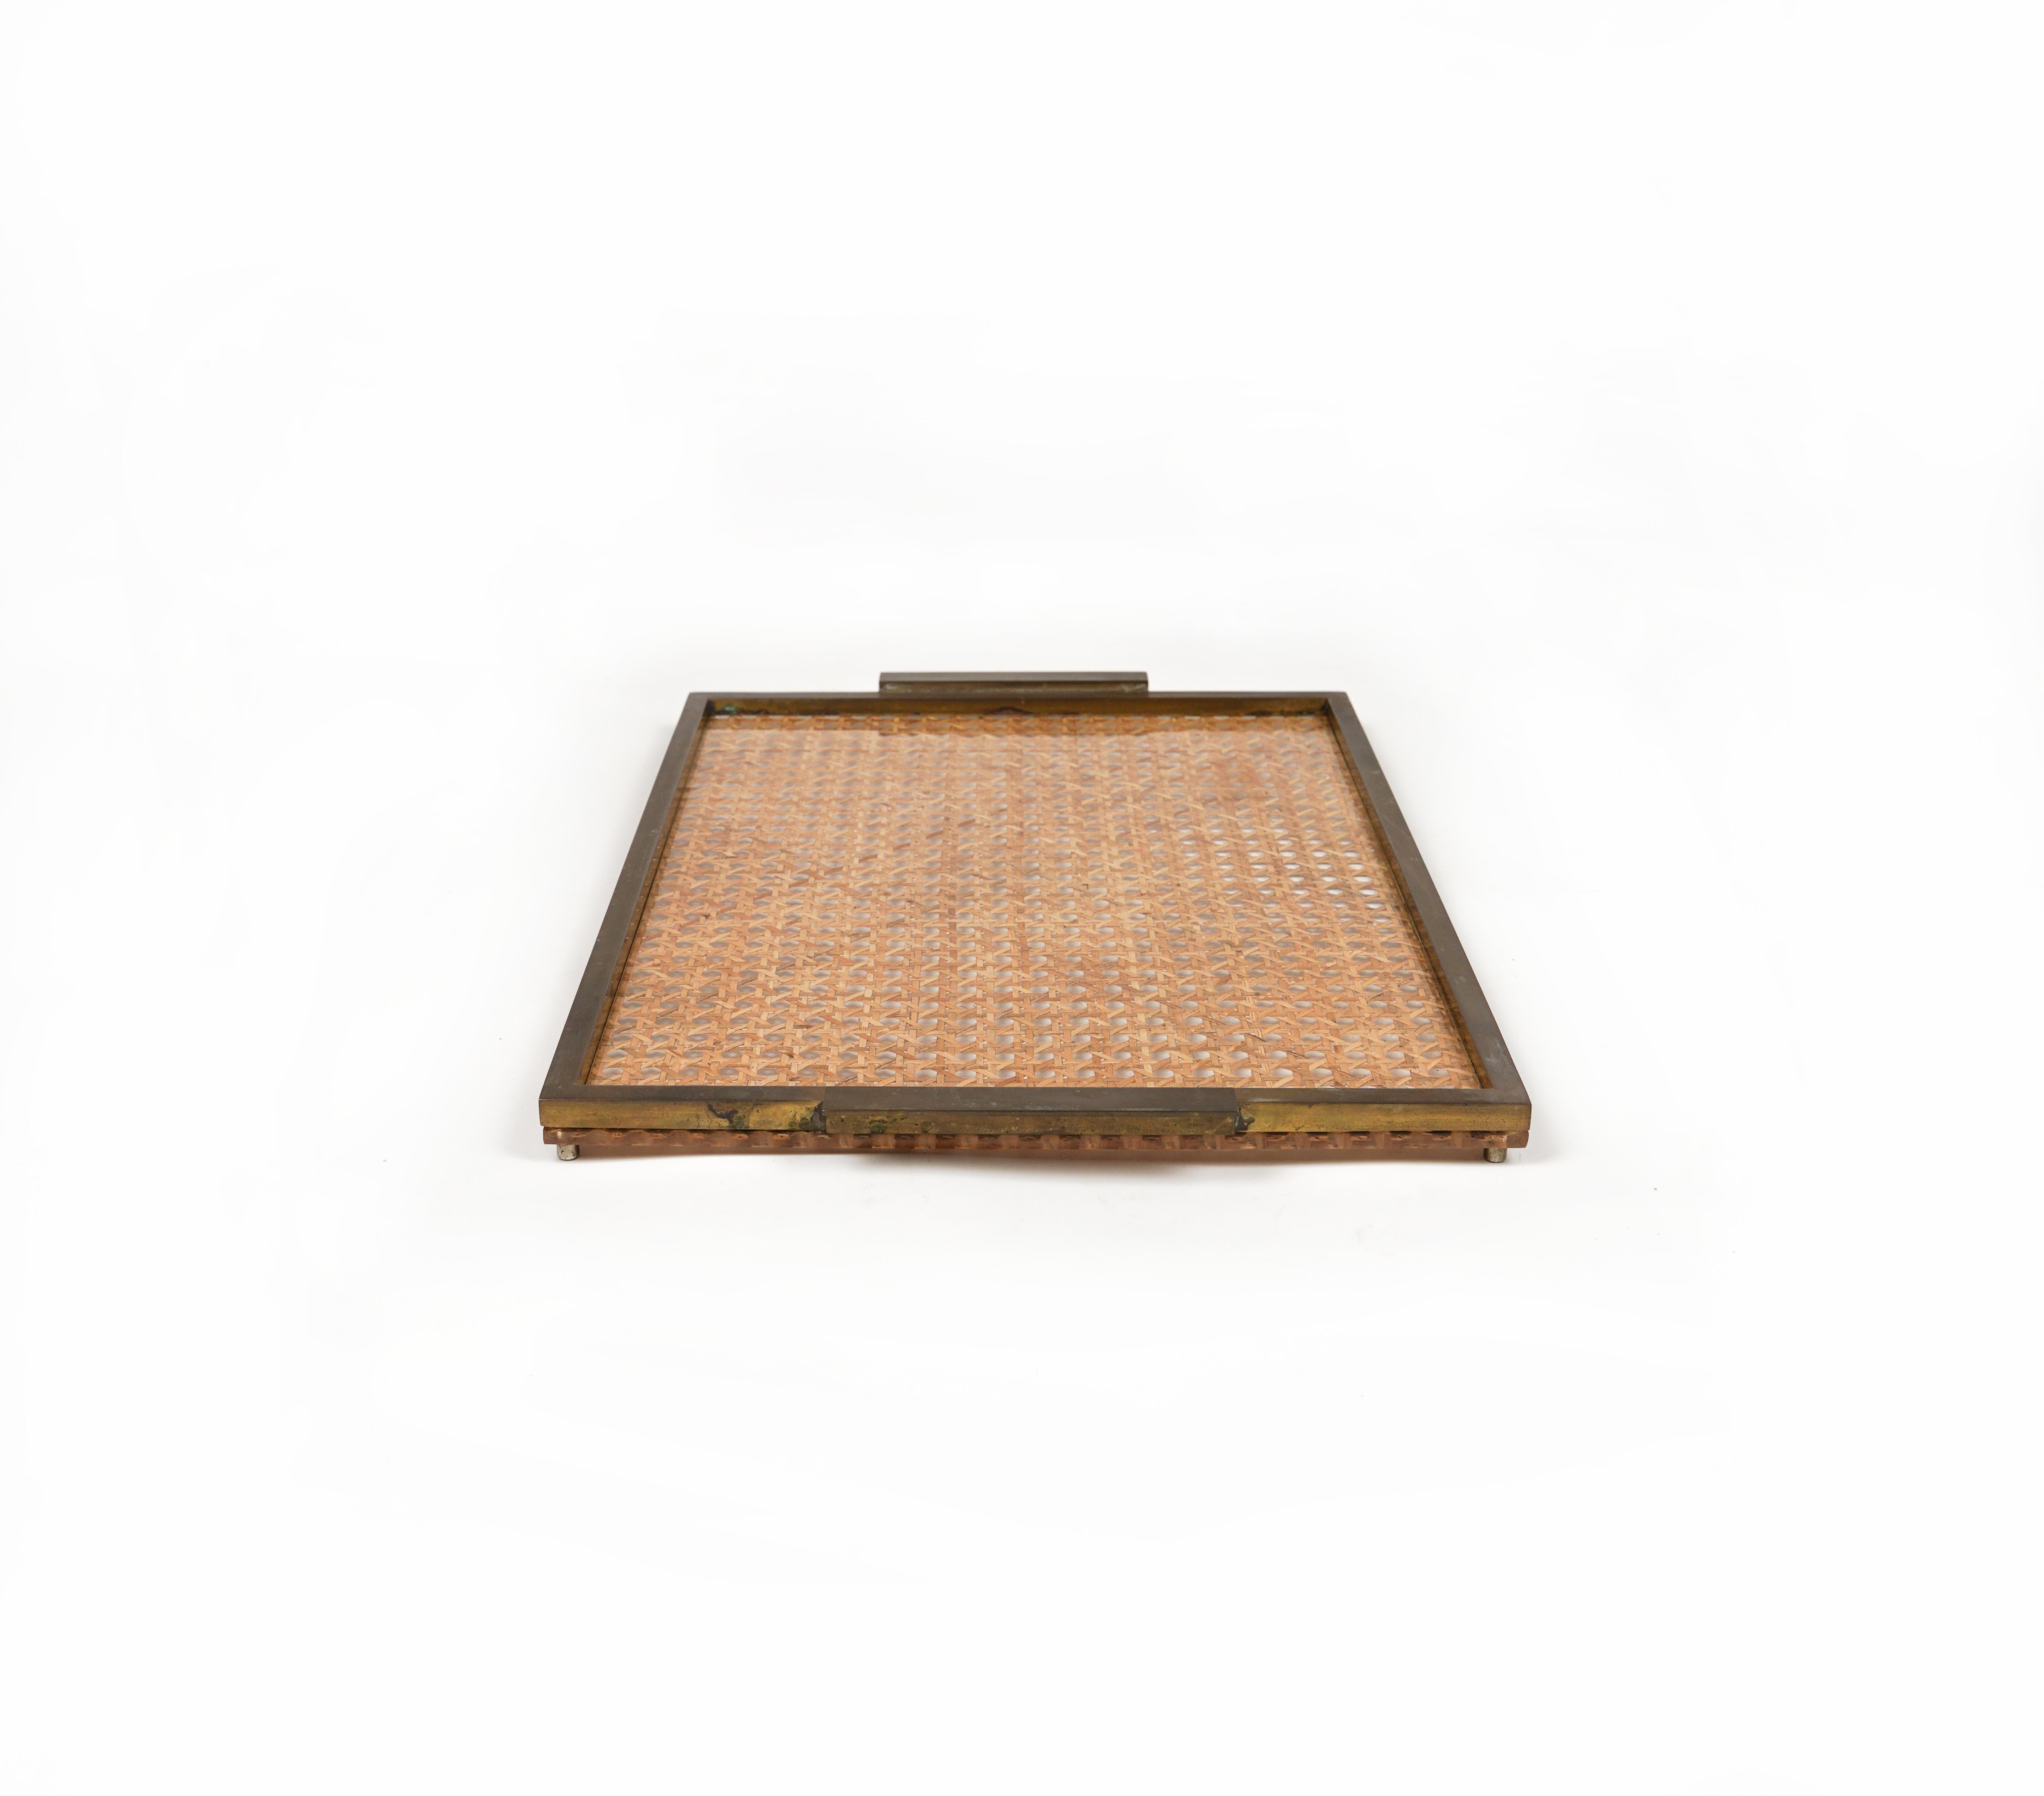 Metal Serving Tray in Lucite, Rattan & Brass Christian Dior Style, Italy, 1970s For Sale